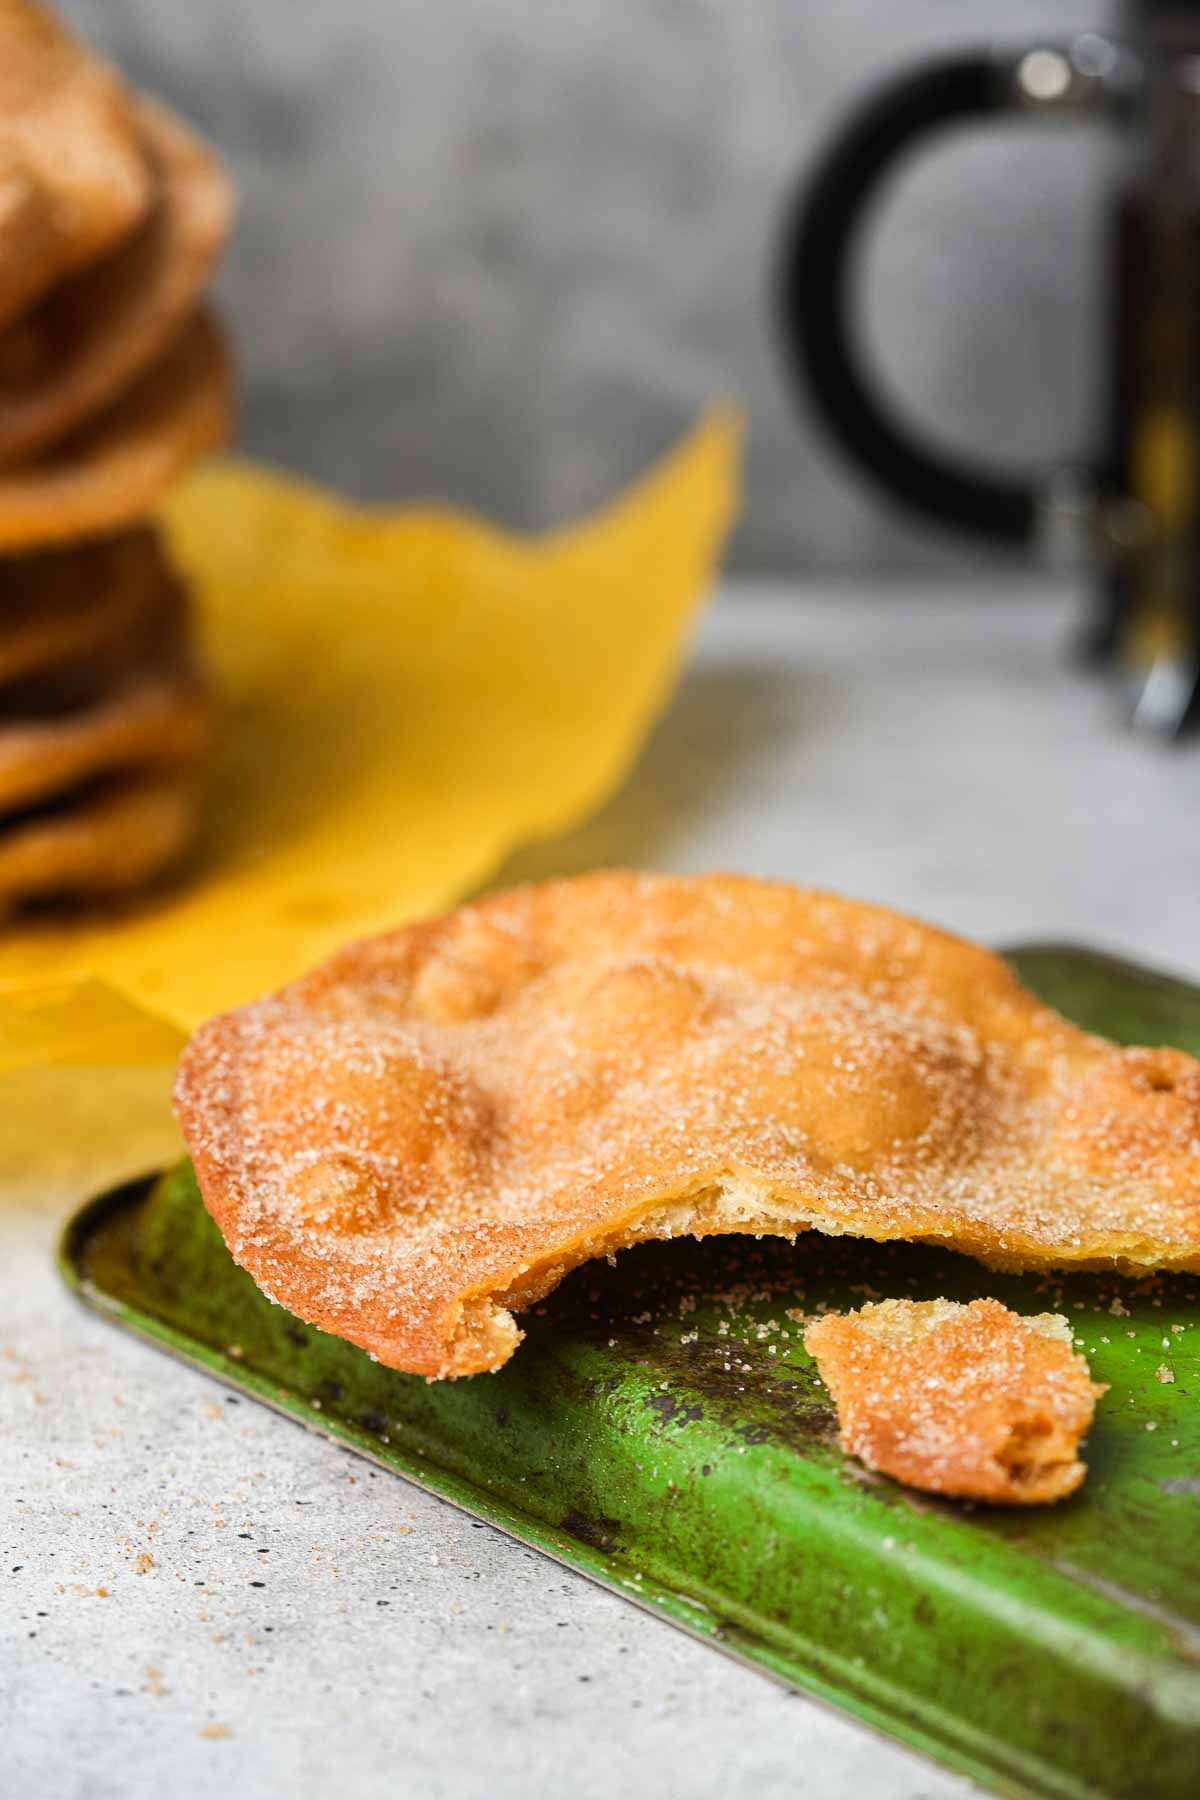 A stack of fried bunuelos on a tray with a cup of coffee.